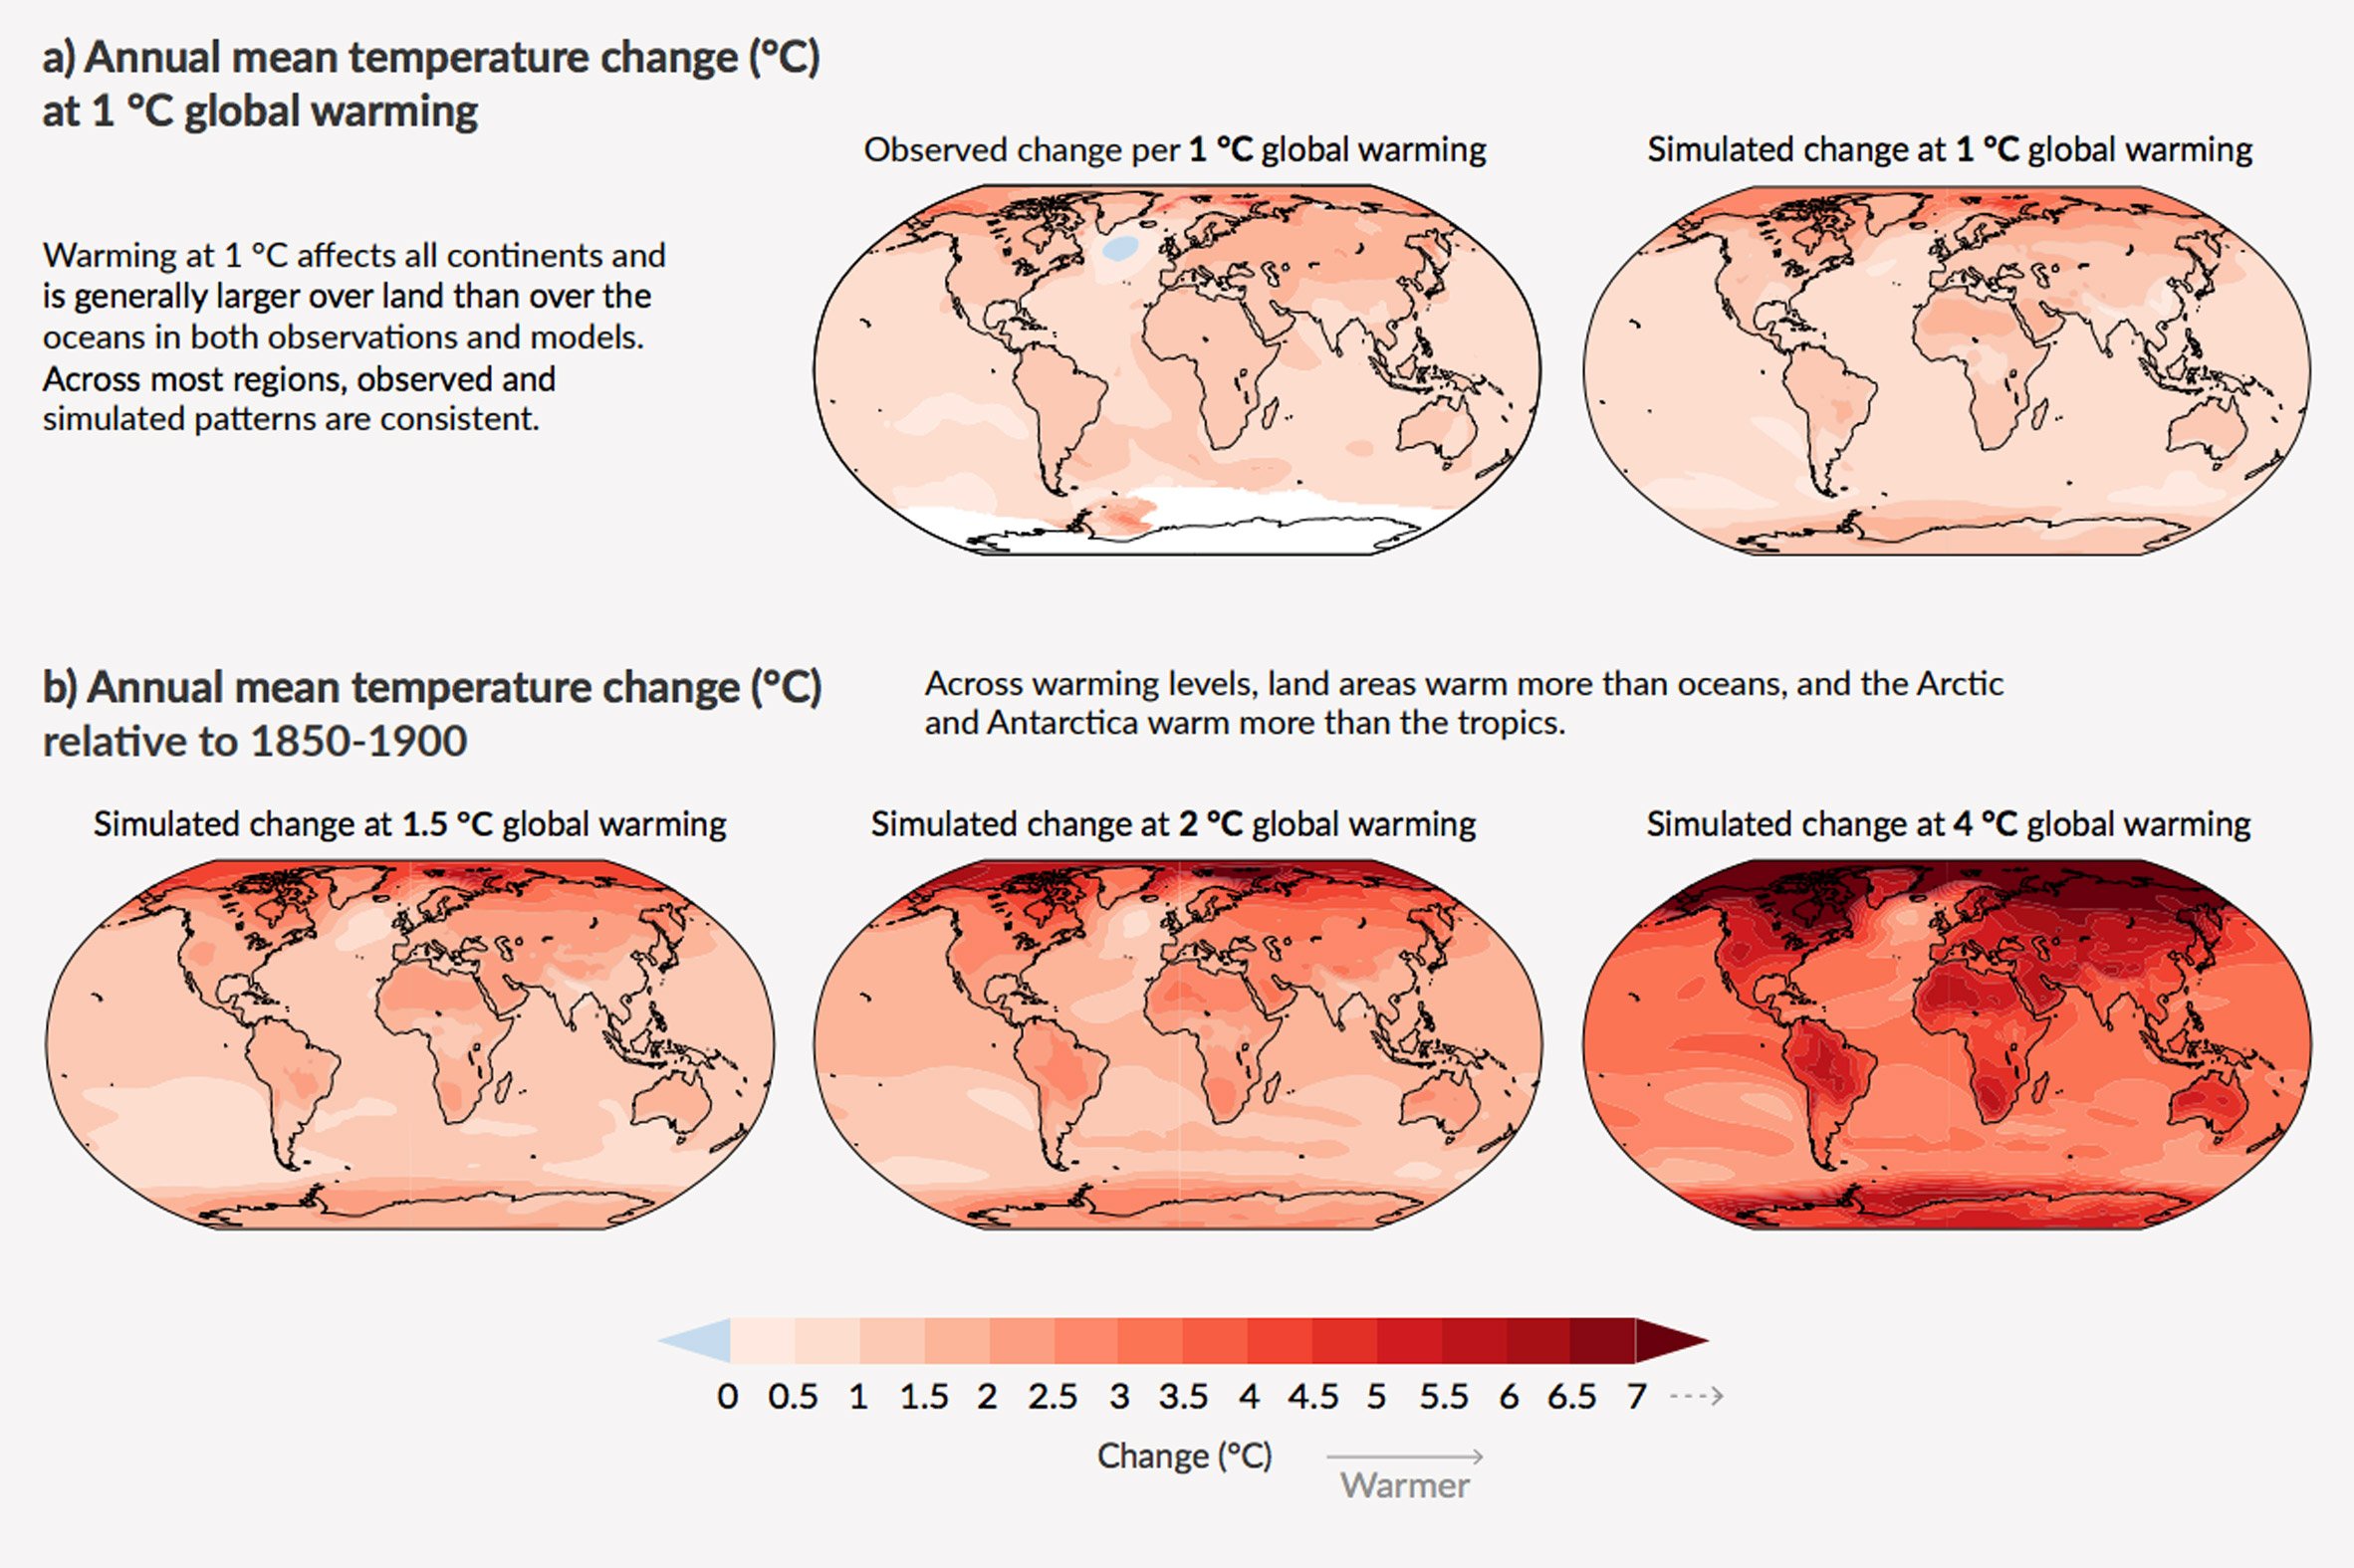 1ipcc-climate-report-2021-surfaces-reporter